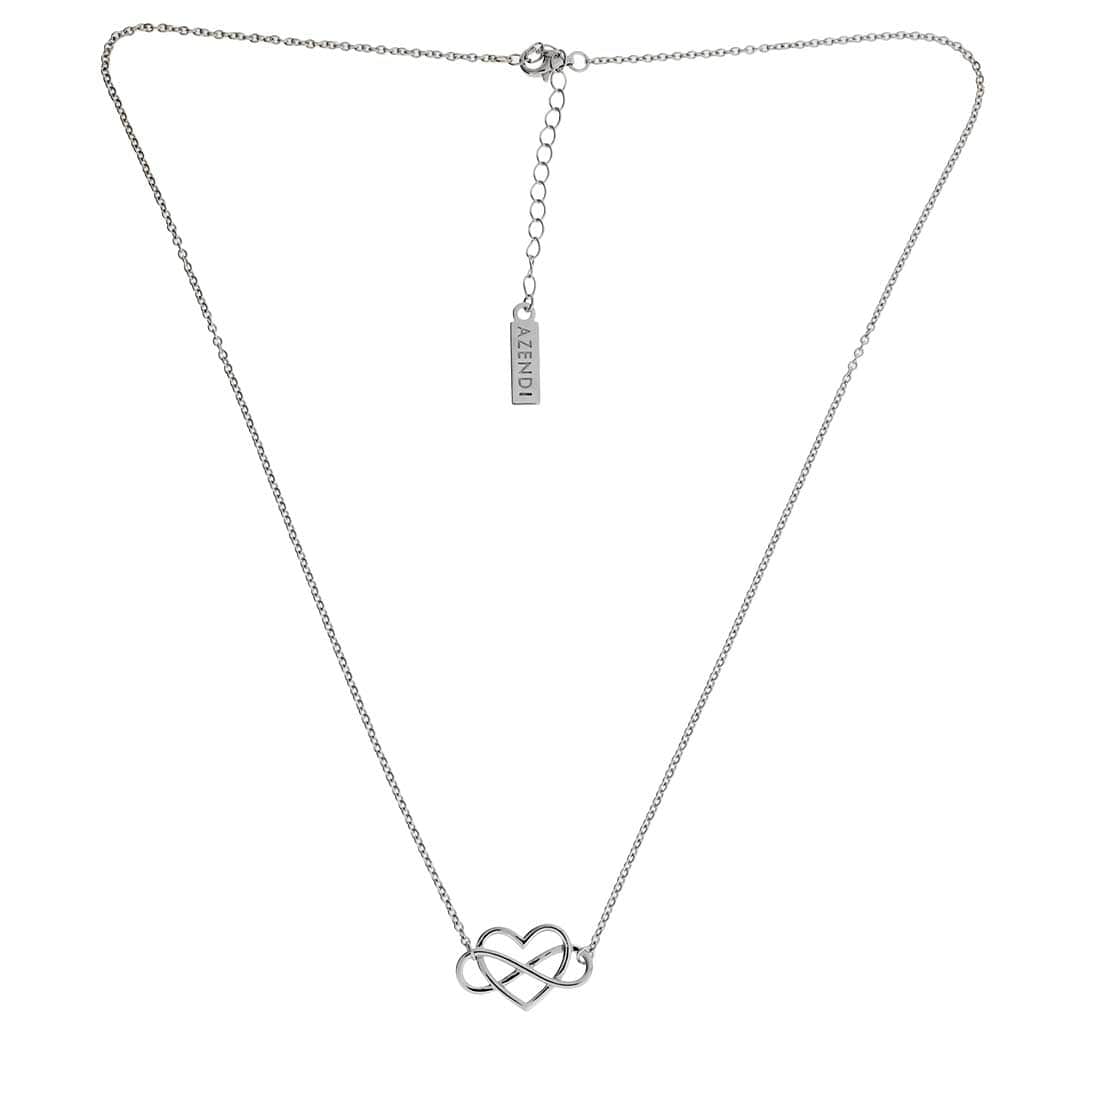 Silver Infinity Heart Interlinked Necklace